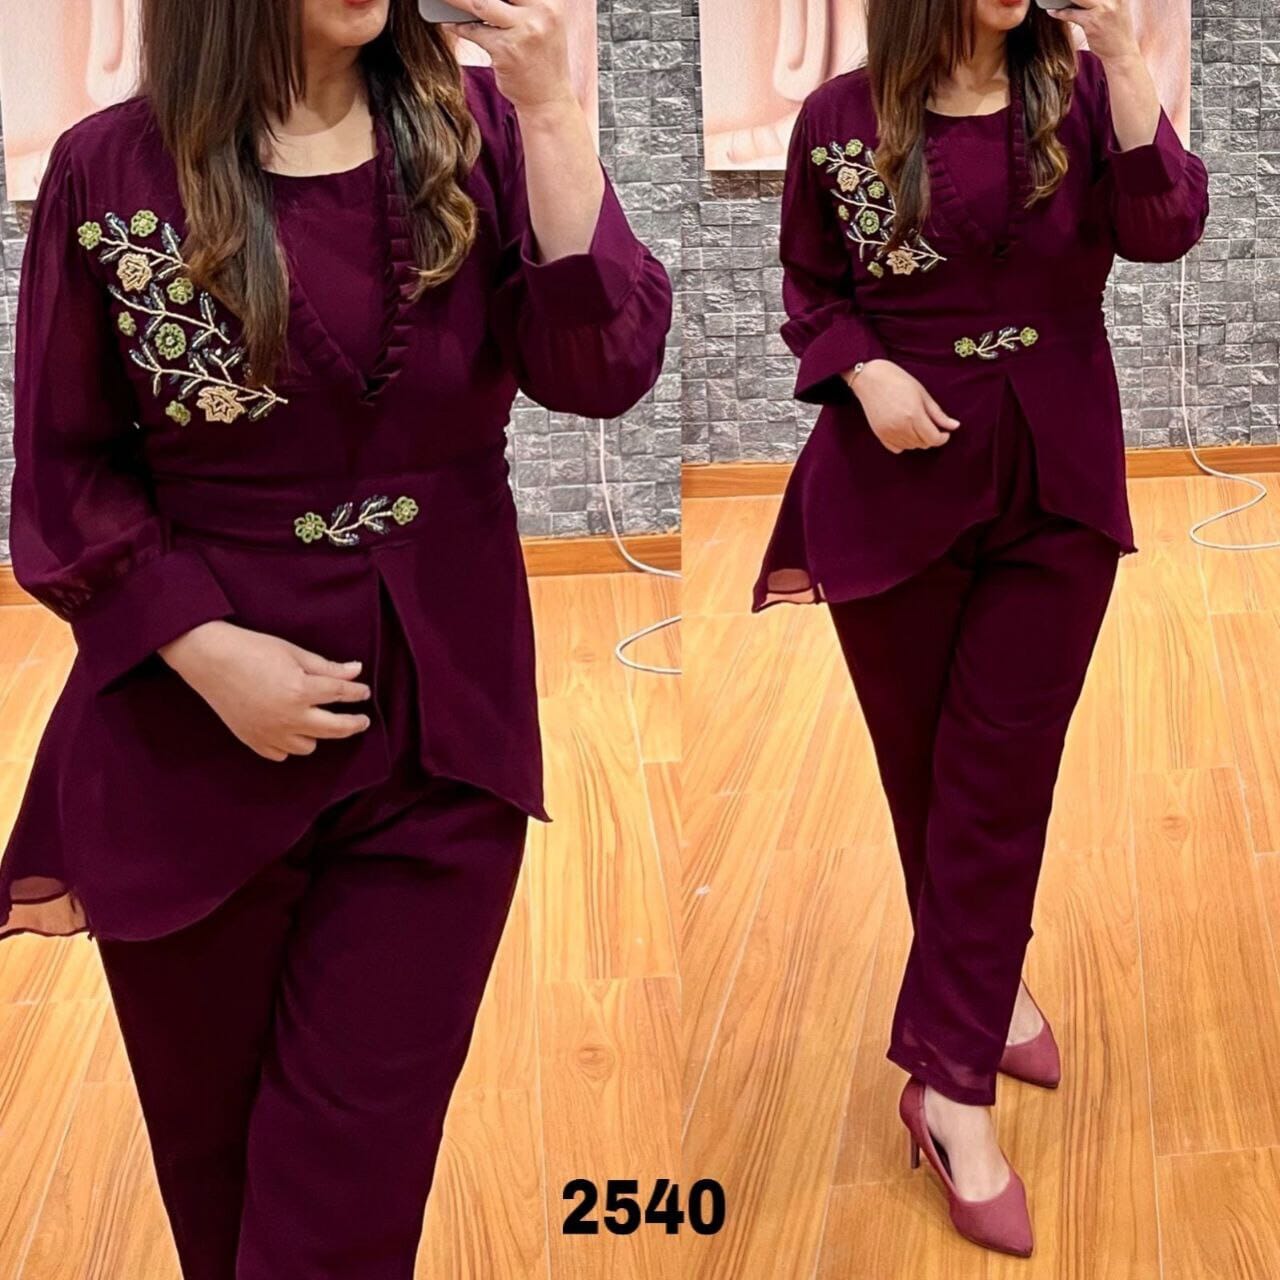 2540 Georgette Handwork Top with Pant Set in 3 colors Designer Suits shopindi.sg 